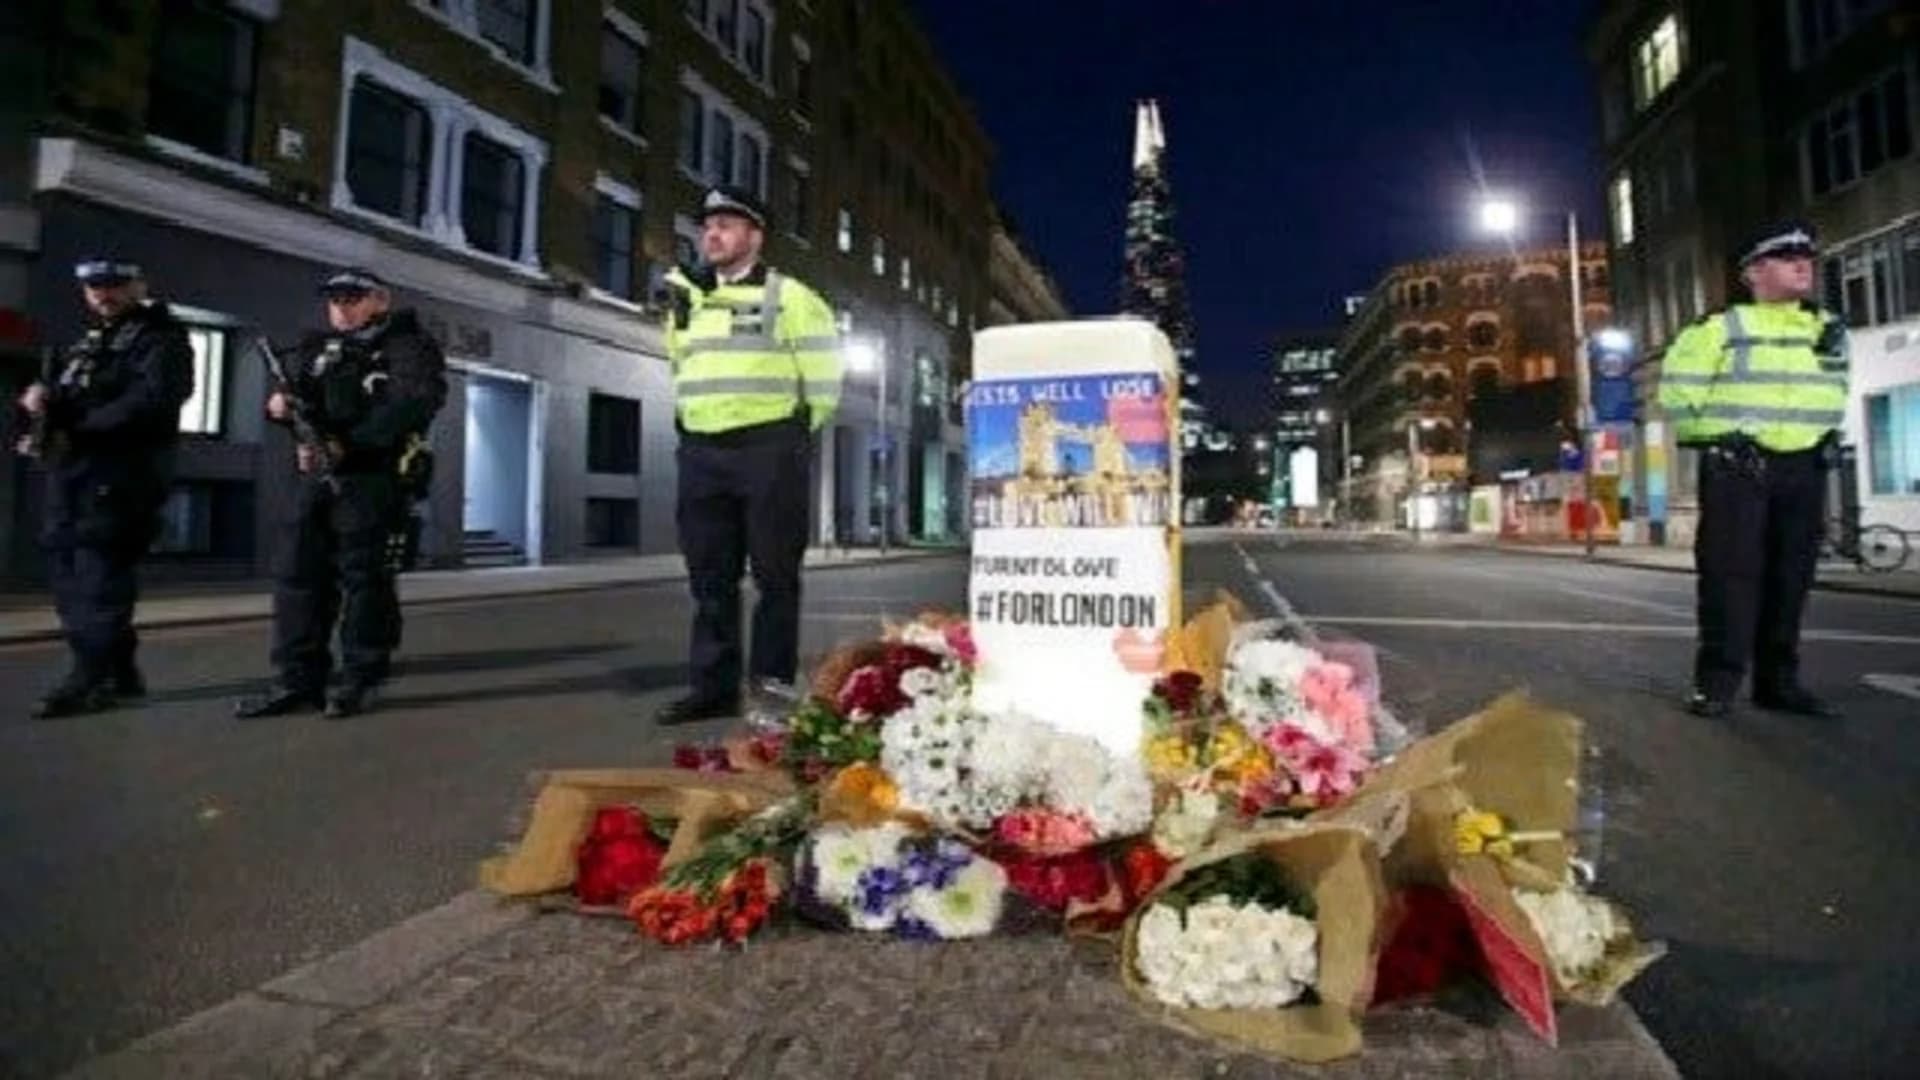 Reports: London terror attack victim possibly from NJ area